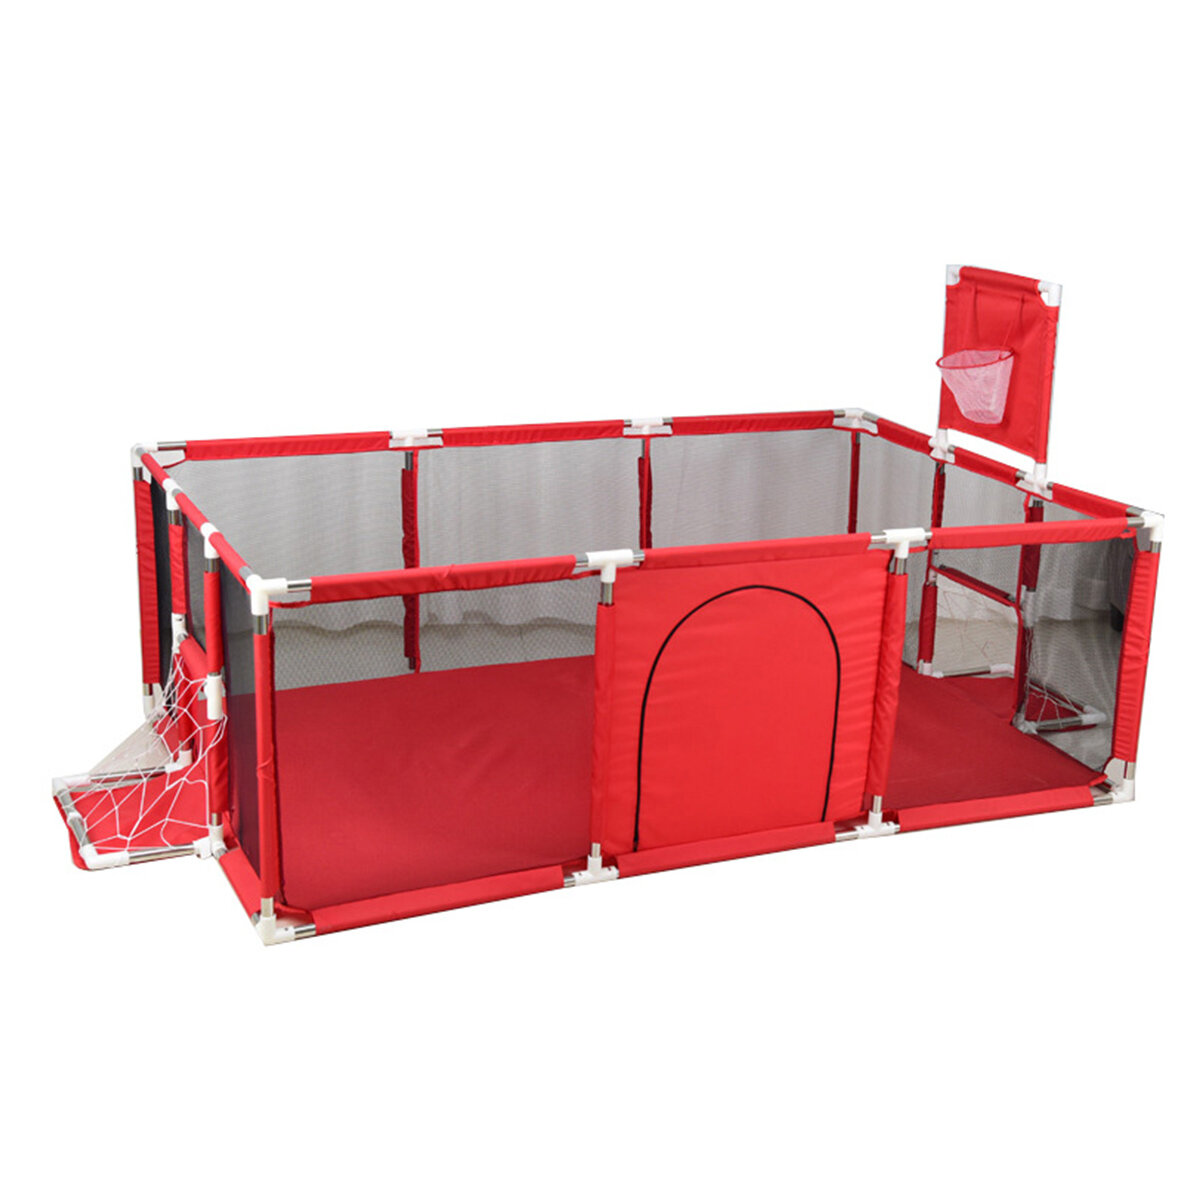 best price,in,baby,playpen,safety,gate,yard,eu,coupon,price,discount